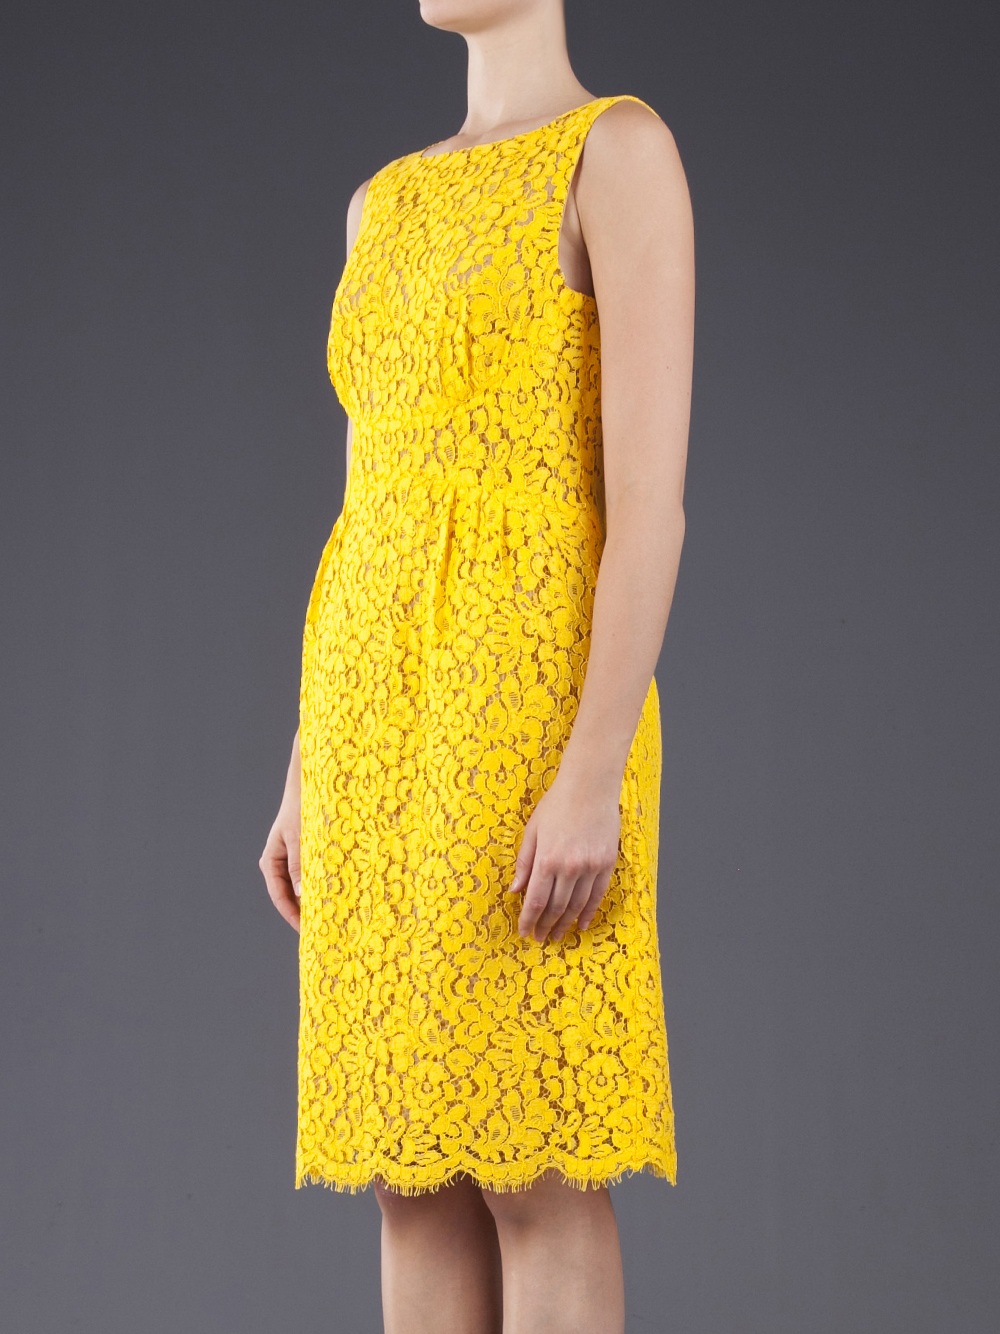 Lyst - Michael Kors Floral Lace Shift Dress in Yellow